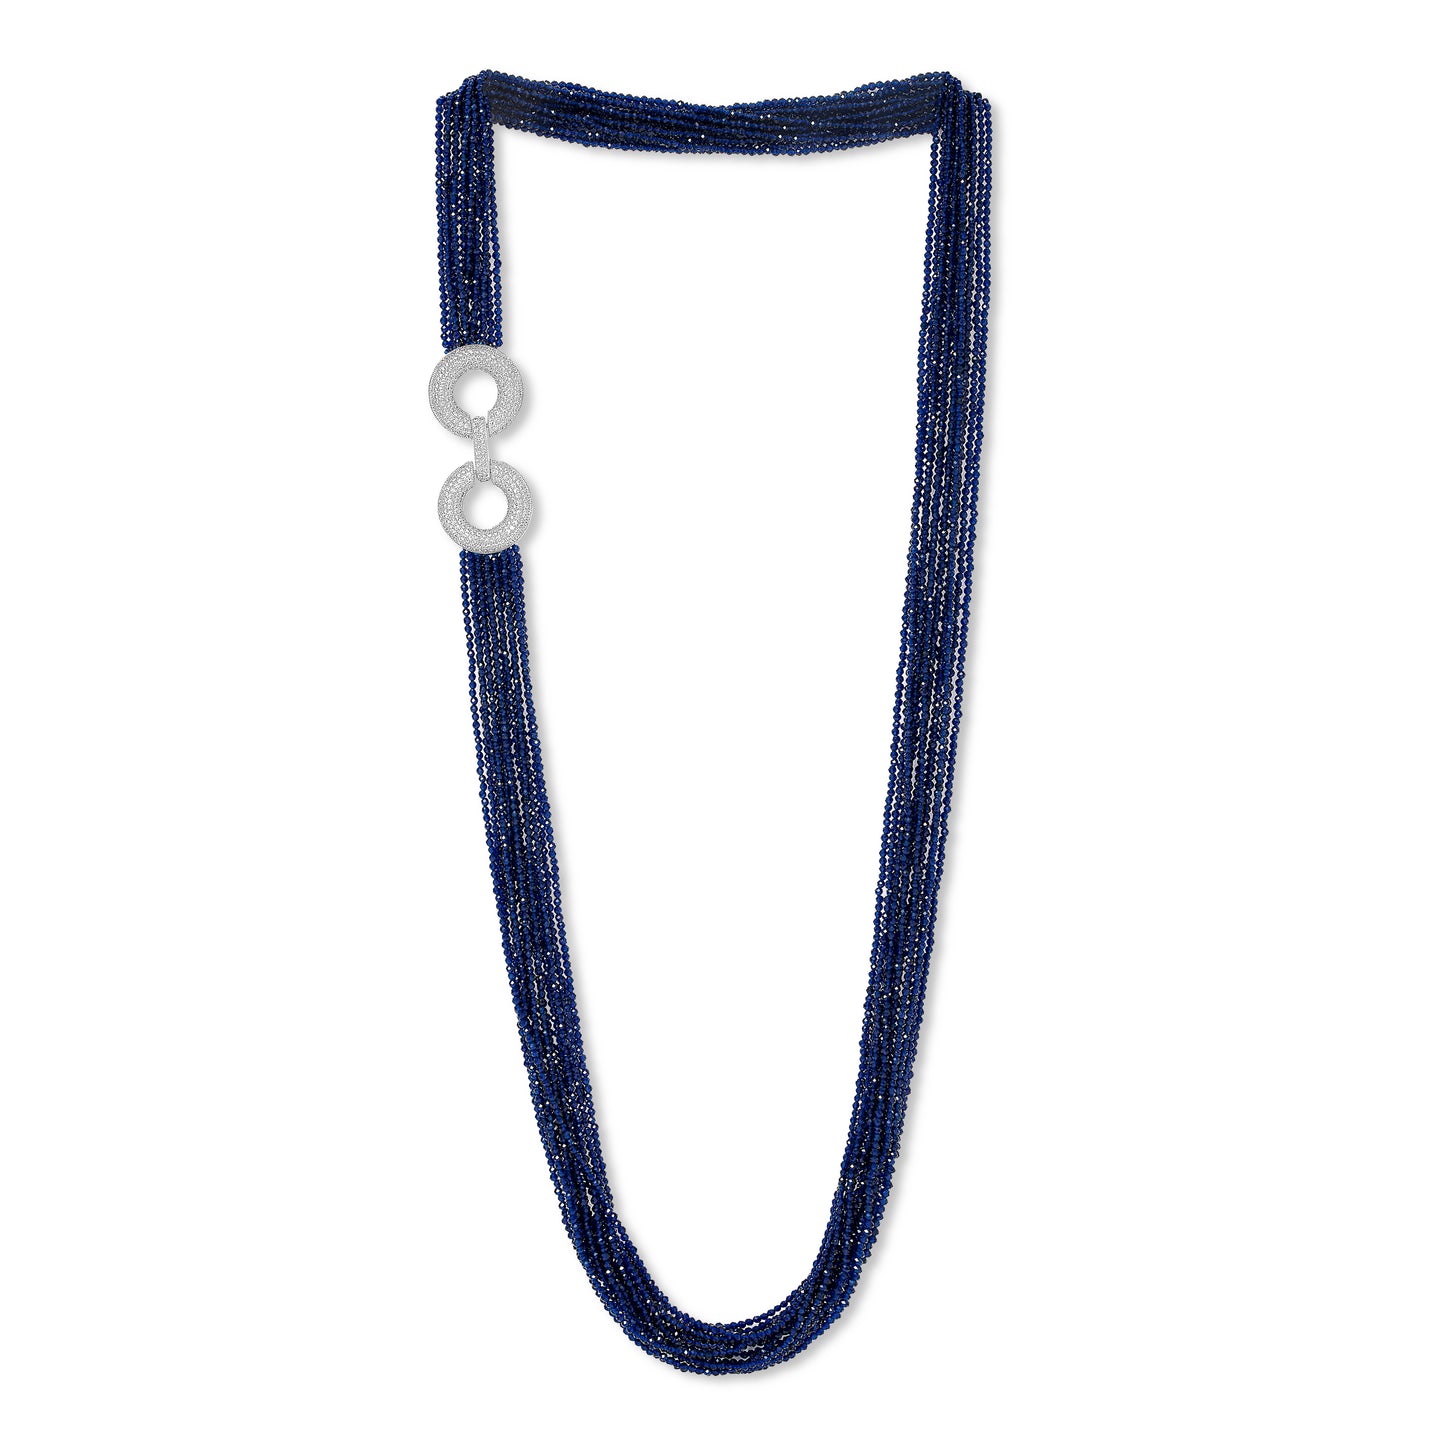 Clara fine blue crystal multi-strand necklace with pave feature clasp